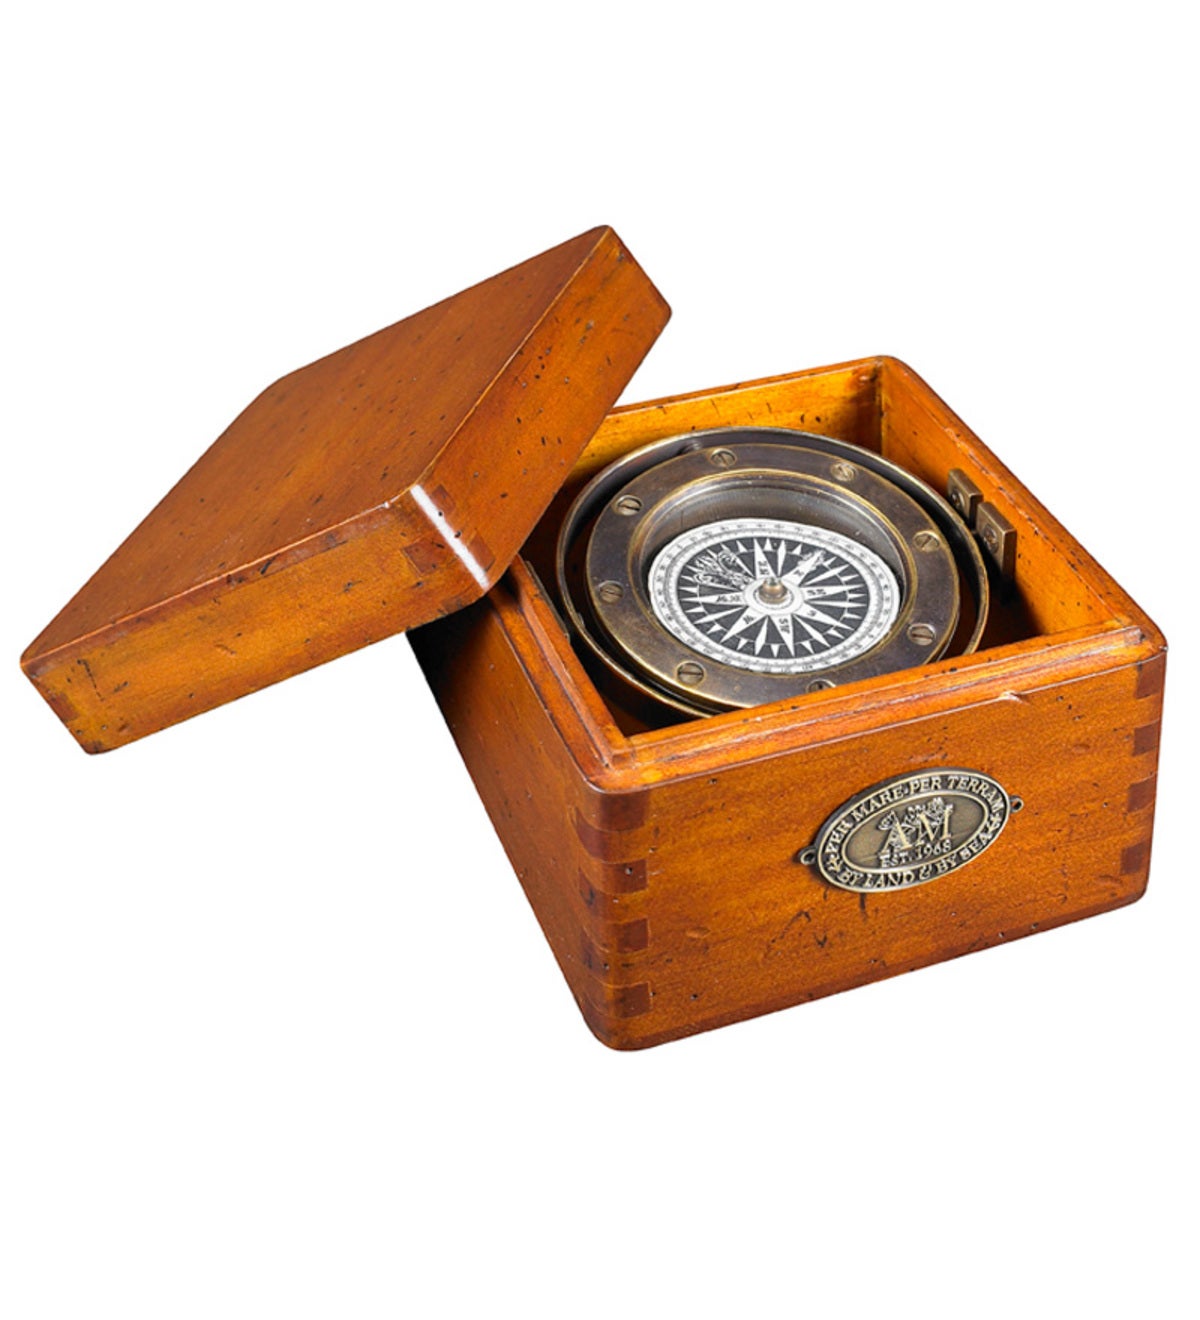 Gimbaled Lifeboat Compass Reproduction